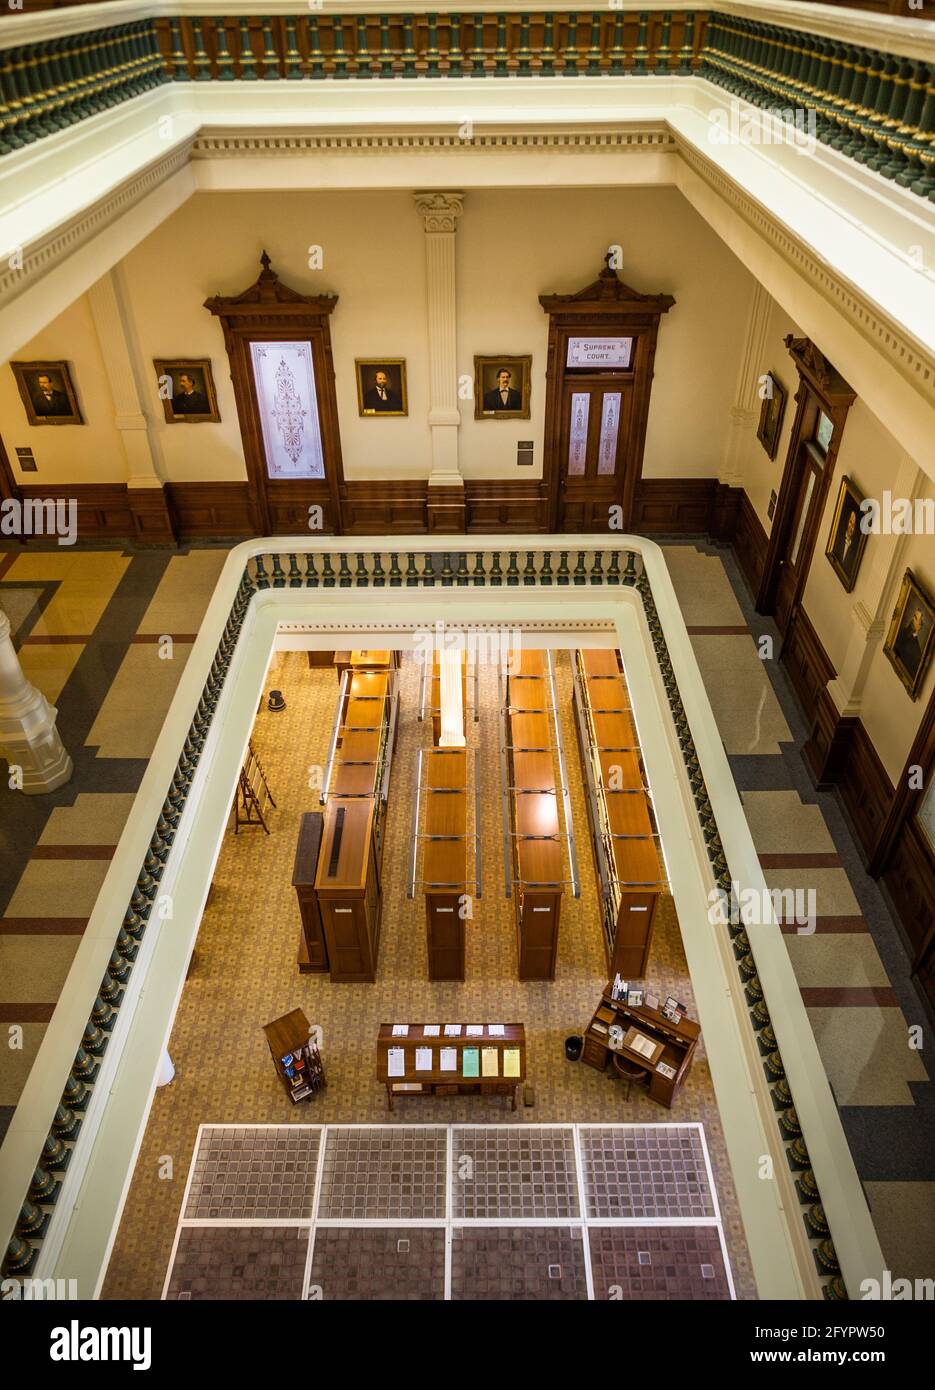 Overlooking the Libarary of Congress in the Texas State Capitol building in Austin, Texas, USA Stock Photo